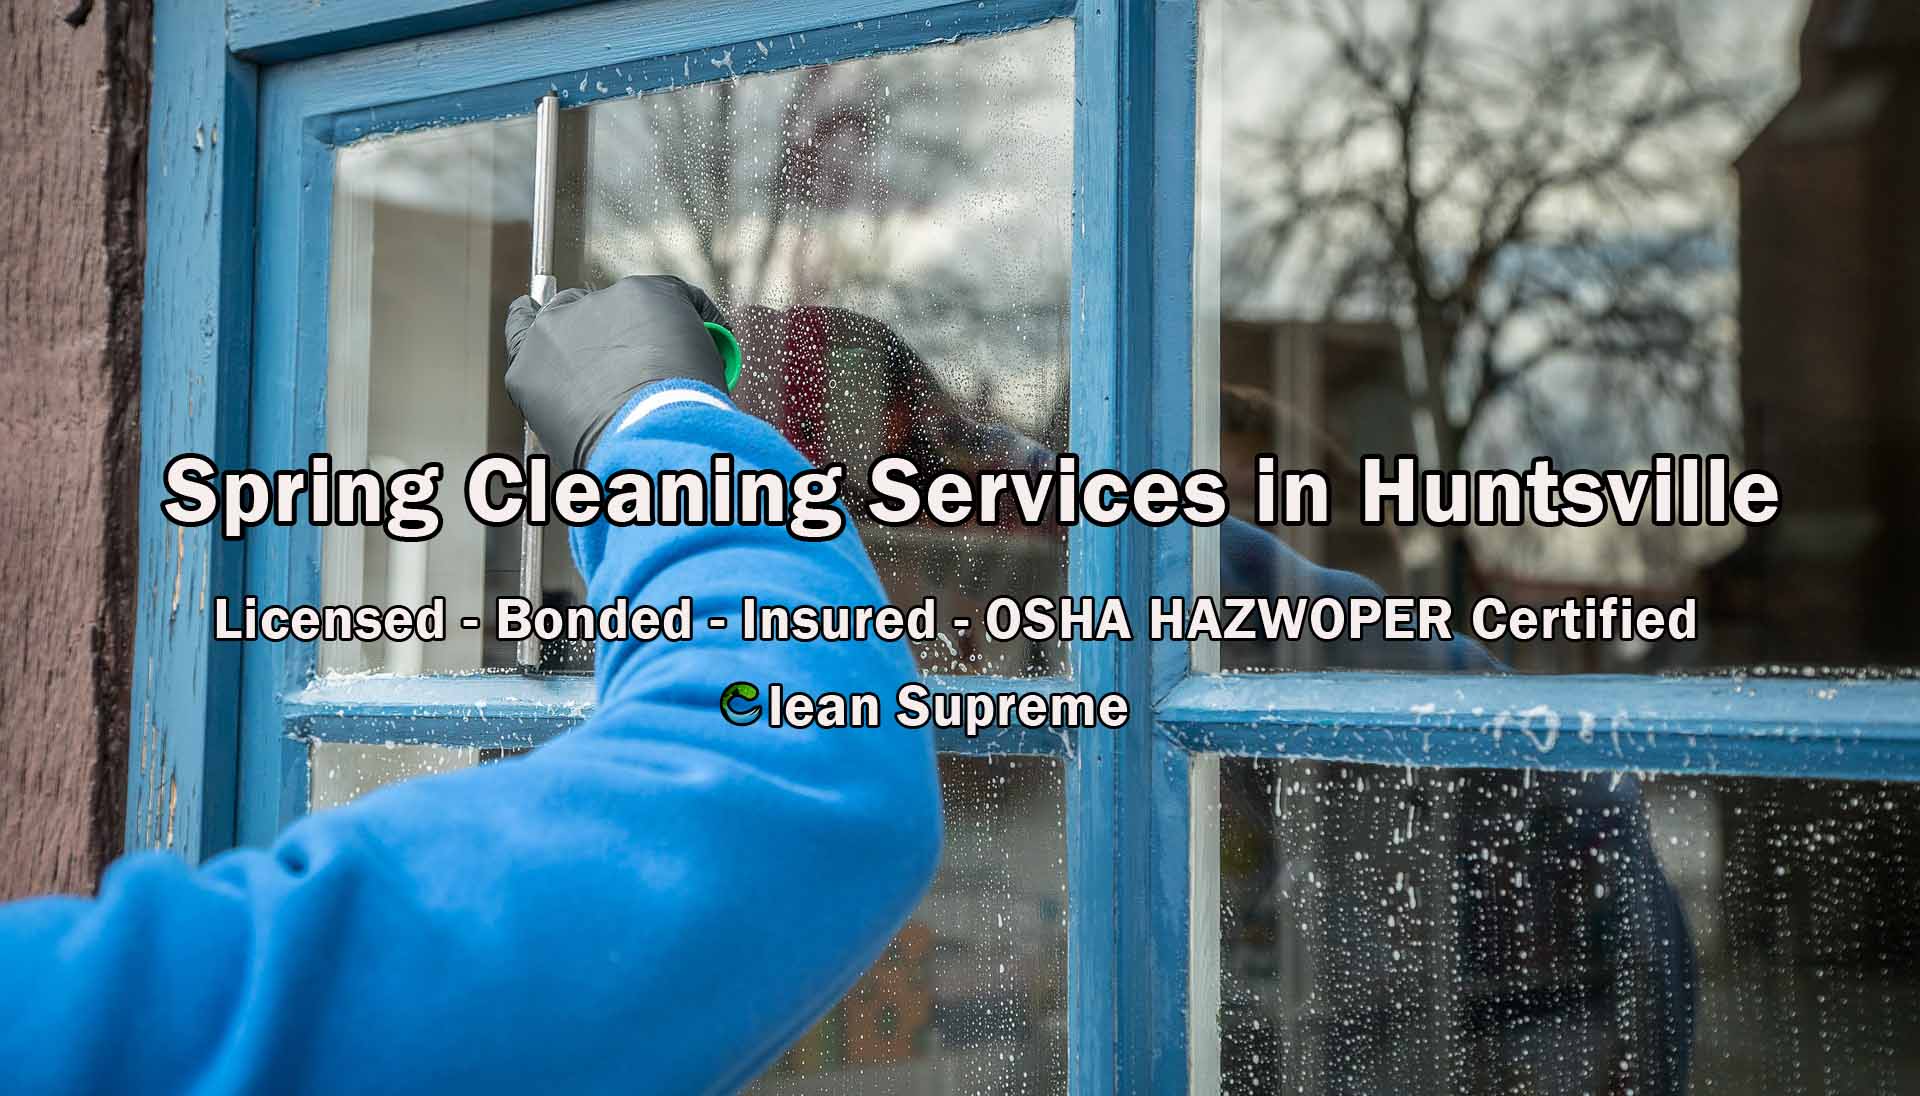 Spring Cleaning Services in Huntsville